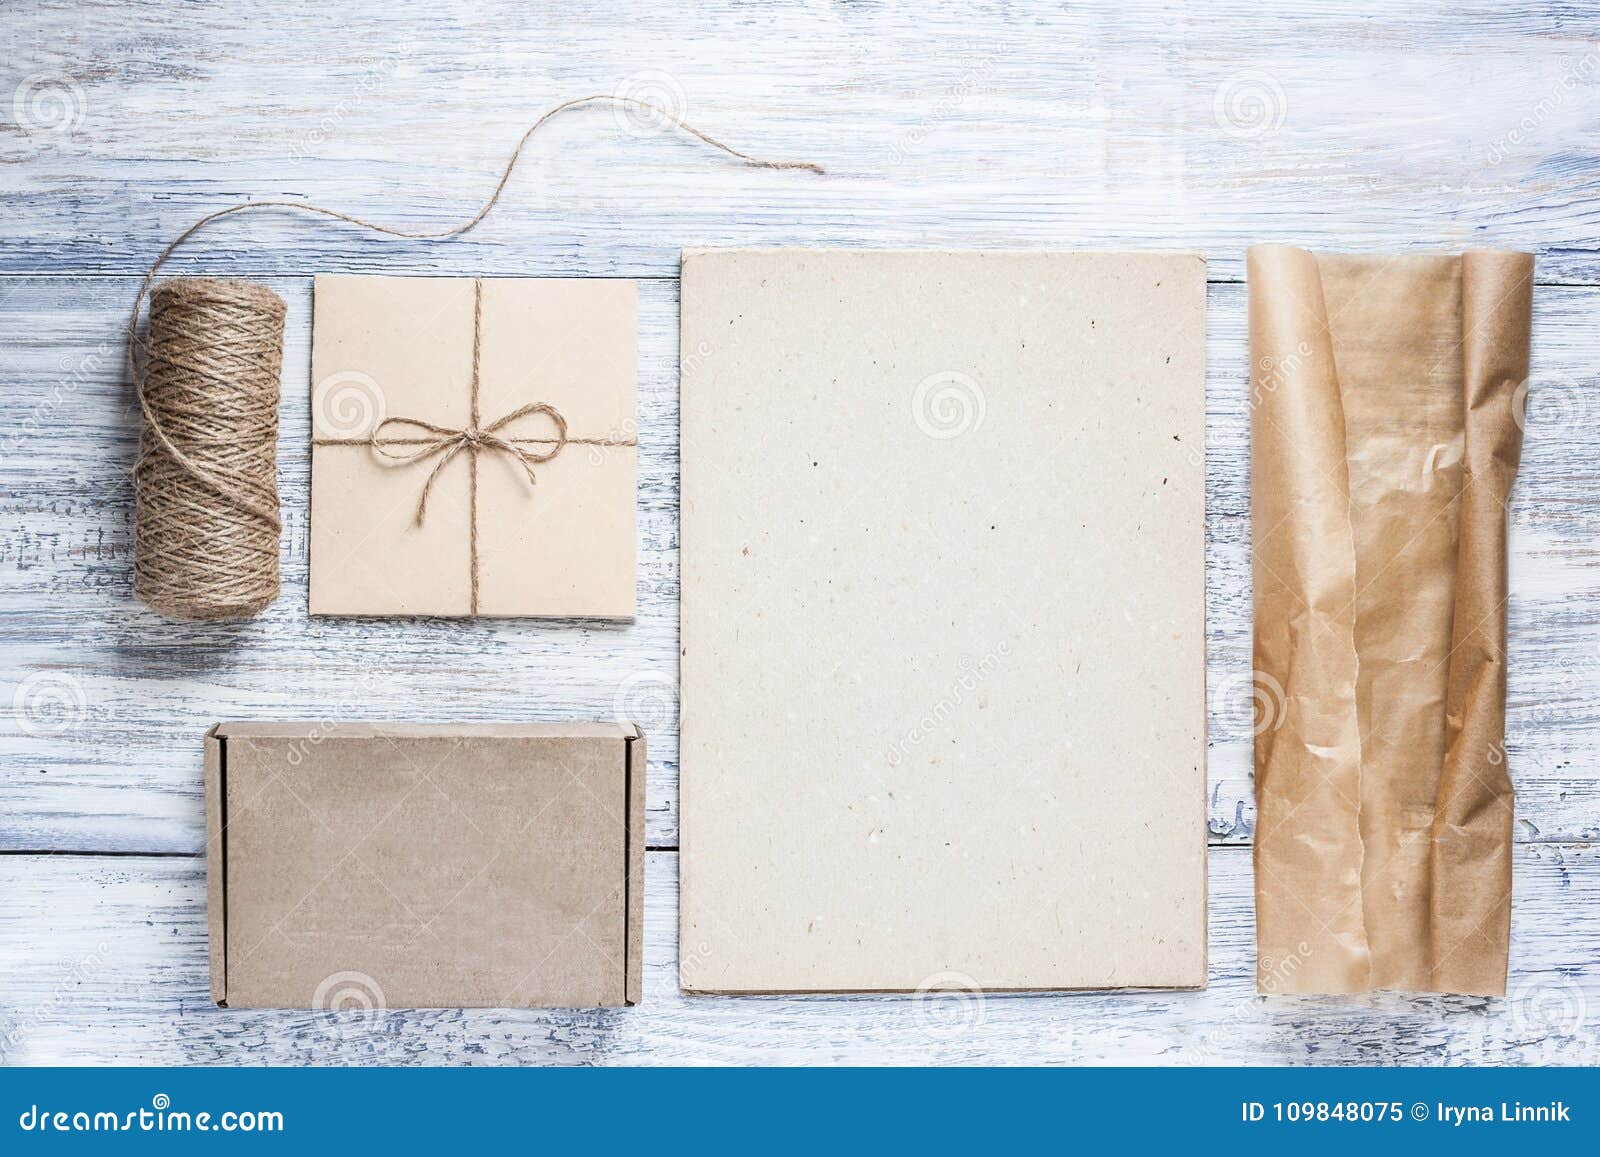 Download Mockup Boxes Of Gifts With Natural Paper, Envelope And ...